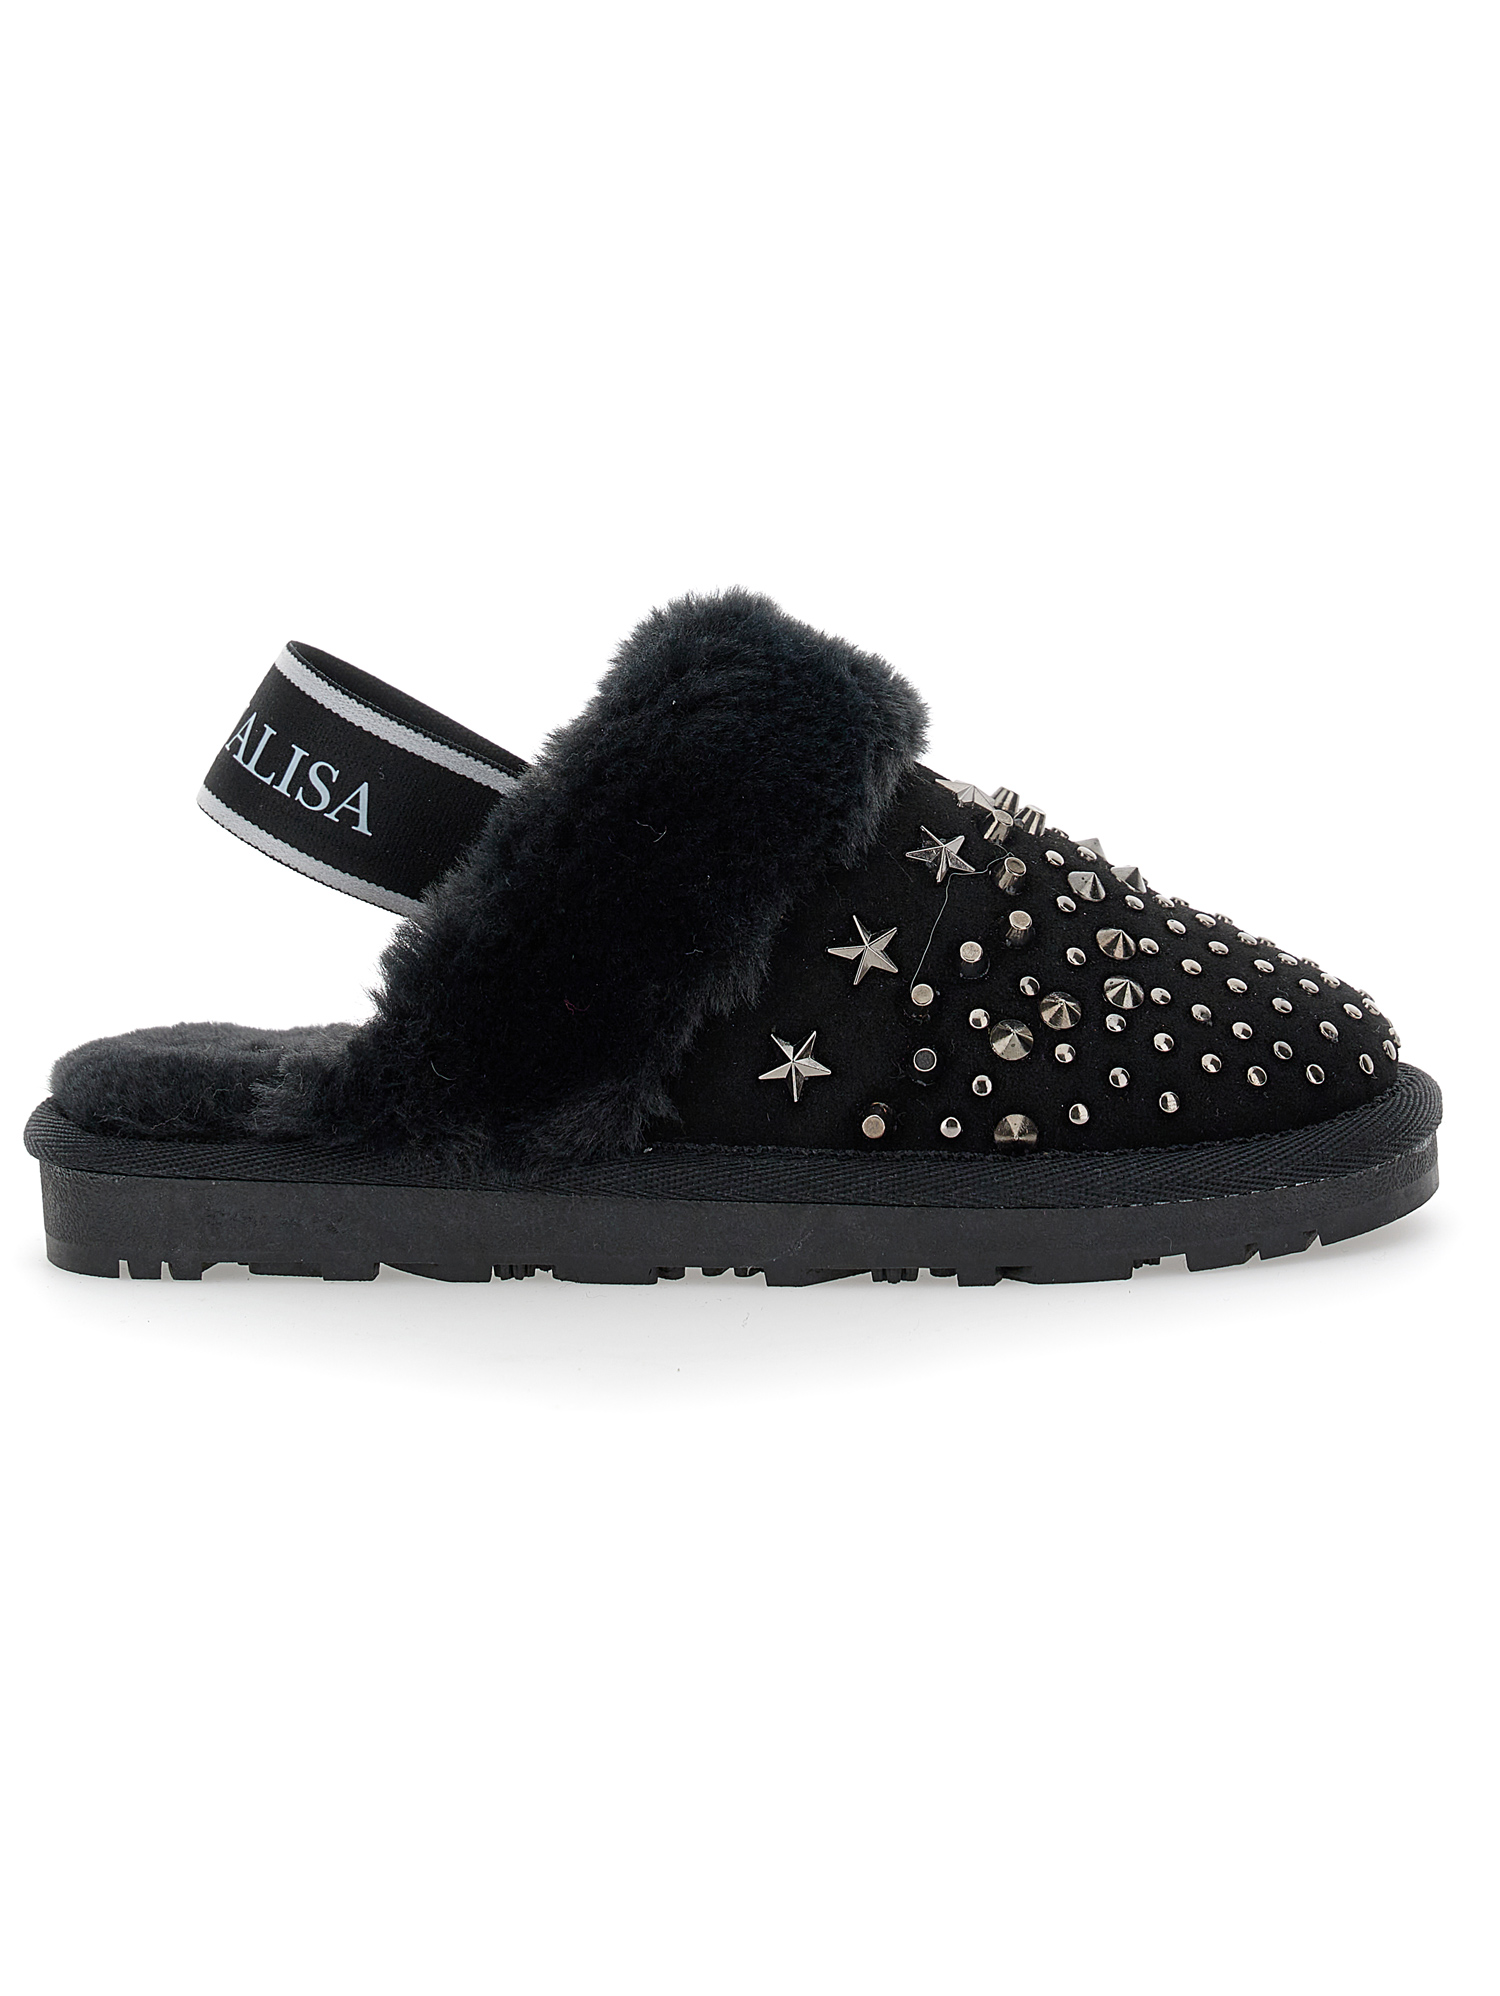 Monnalisa Crust Leather Clogs With Studs In Black